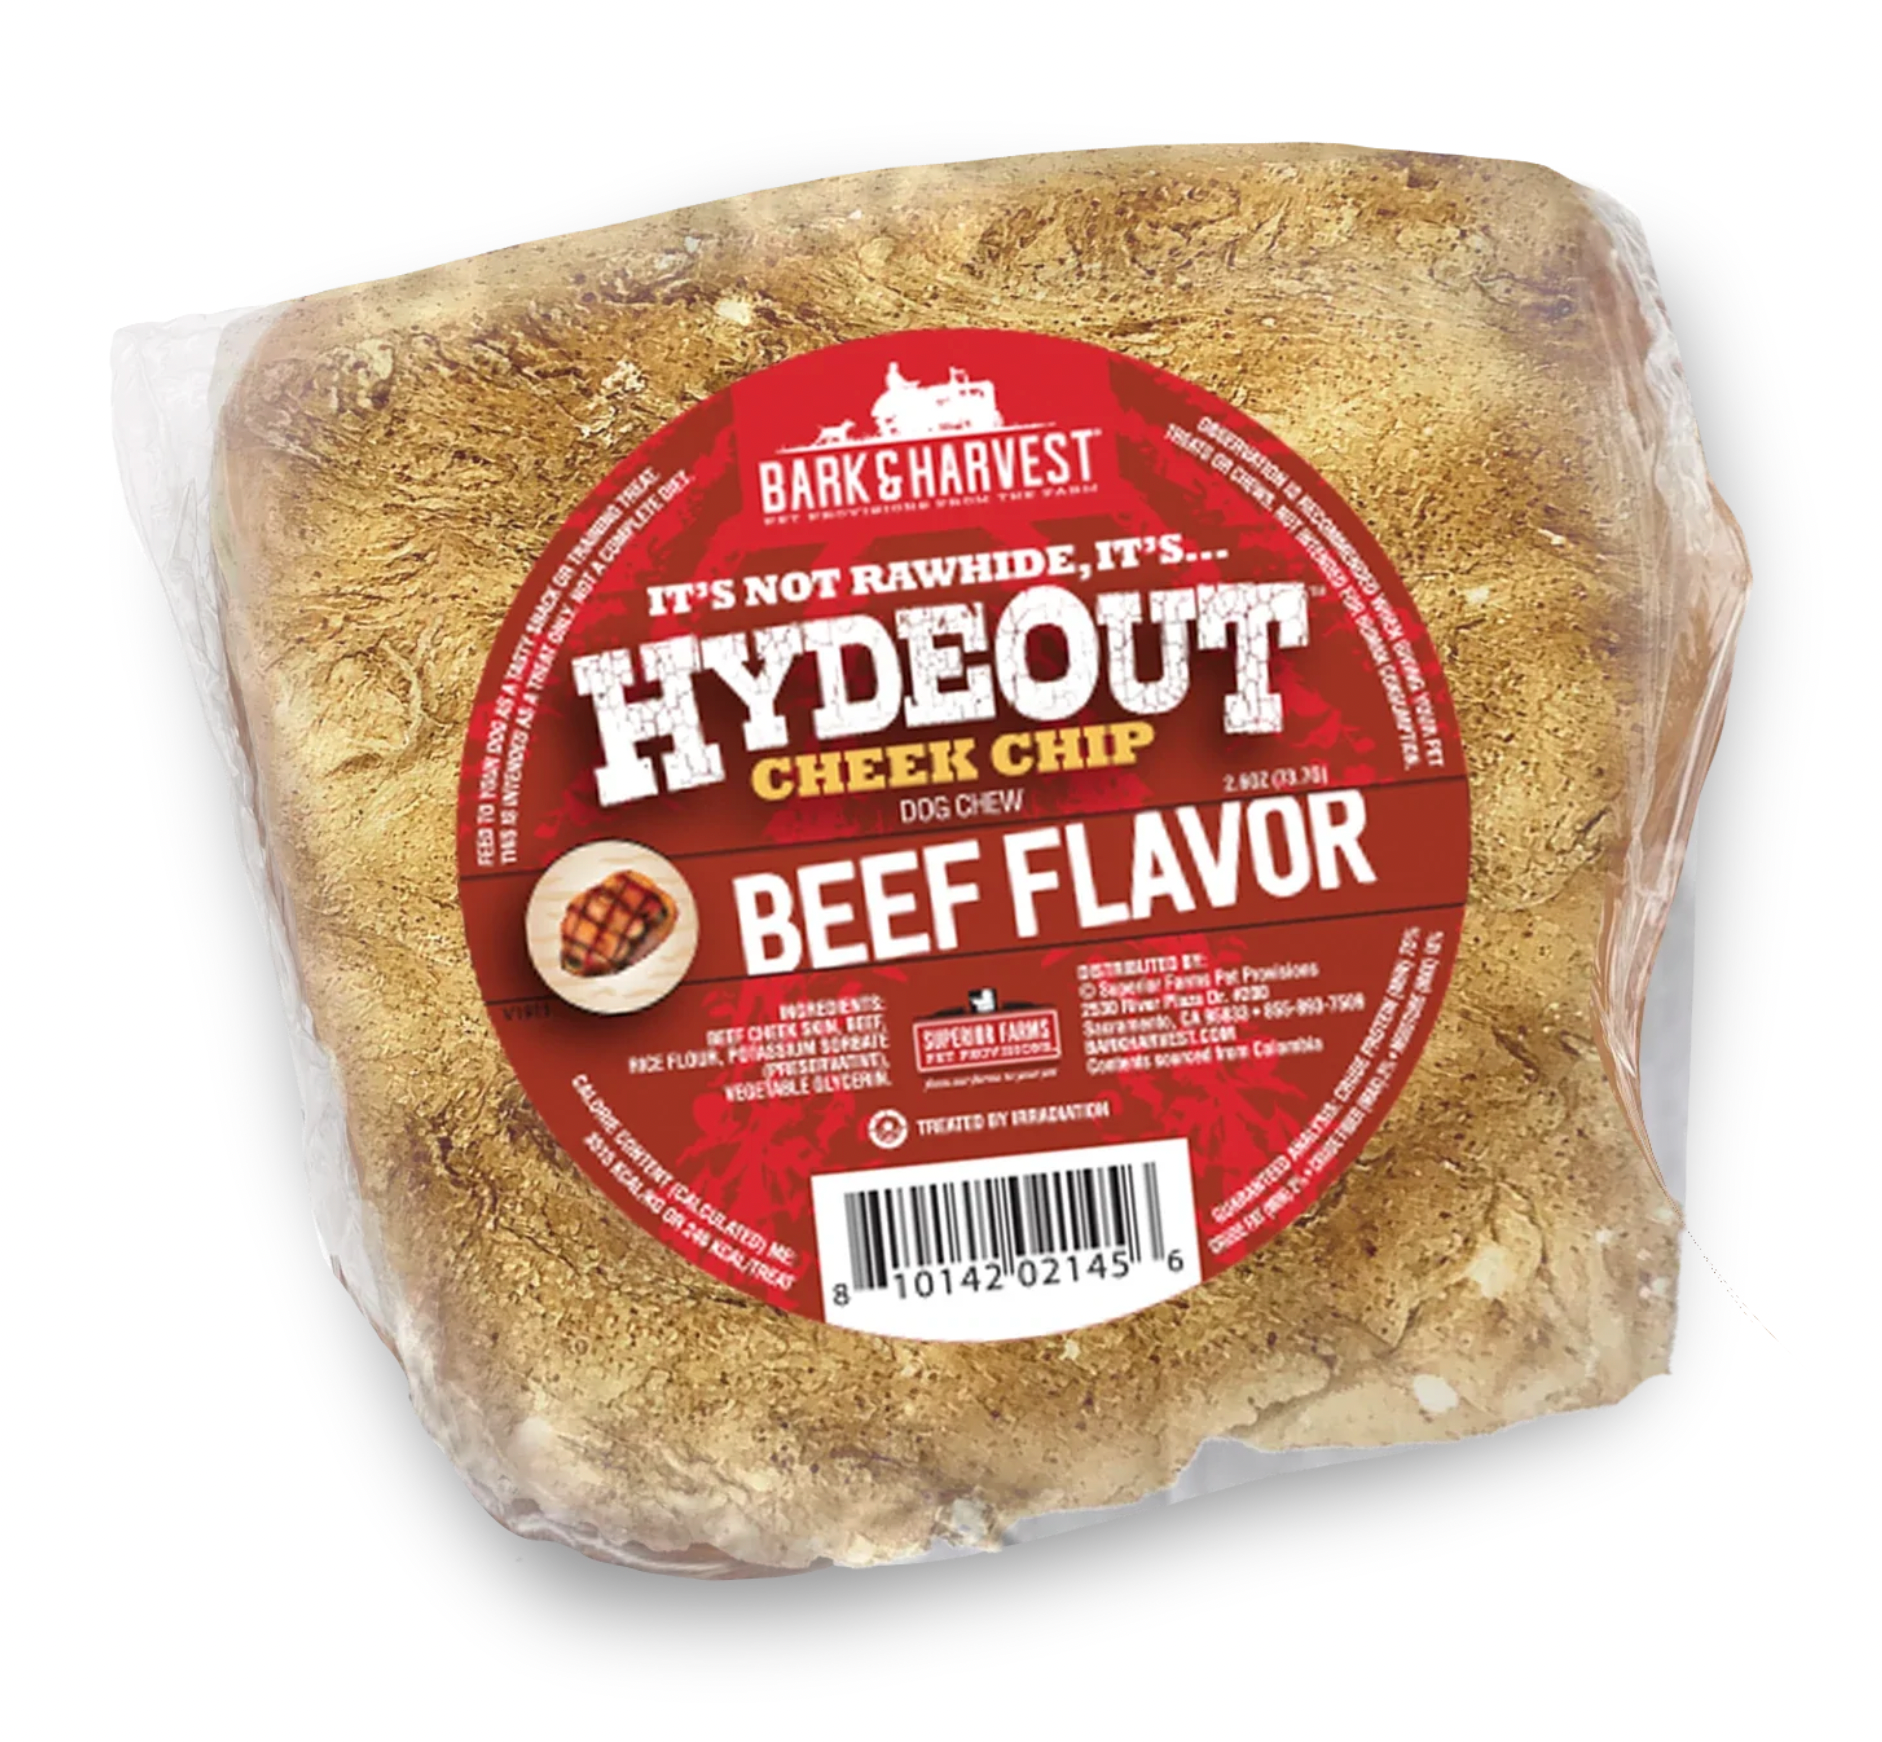 Bark & Harvest Hyde Out Cheek Chips, Beef